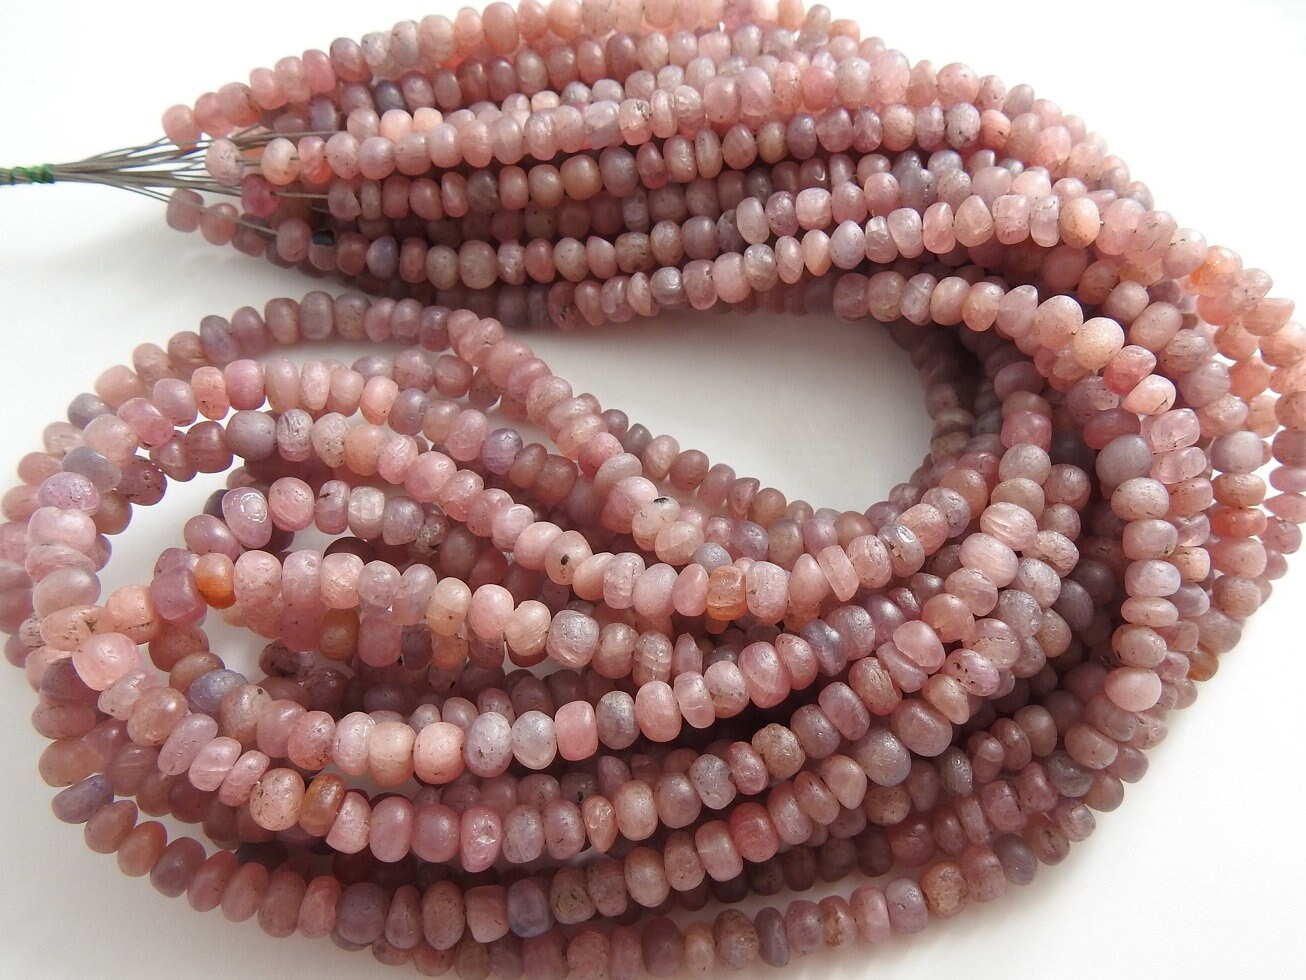 Pink Sapphire Smooth Roundel Bead,Handmade,Matte Polish,Loose Stone,Gemstone For Jewelry Makers 100%Natural 16Inch Strand PME(B14) | Save 33% - Rajasthan Living 11